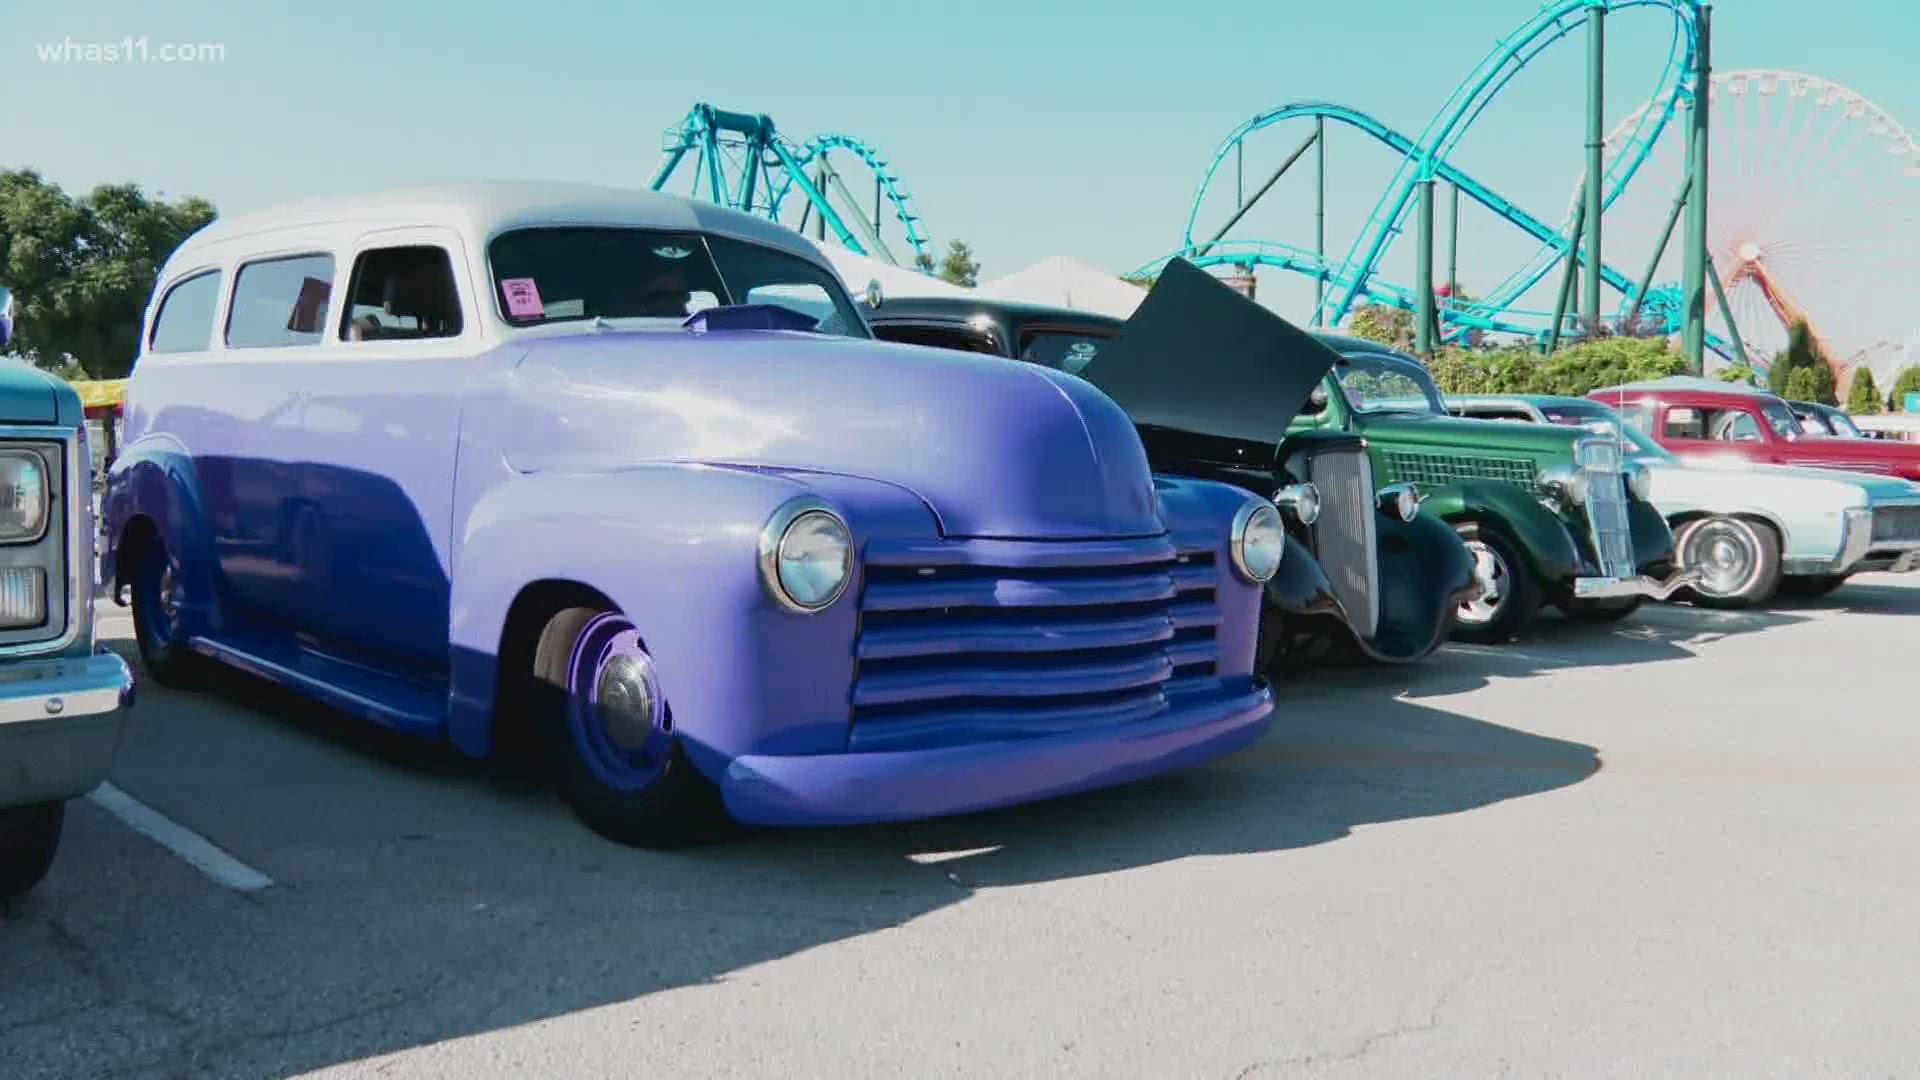 The Jutte family shares their special story on how their purple, 1948 Suburban made it to Louisville for this year's Street Rod Nationals.